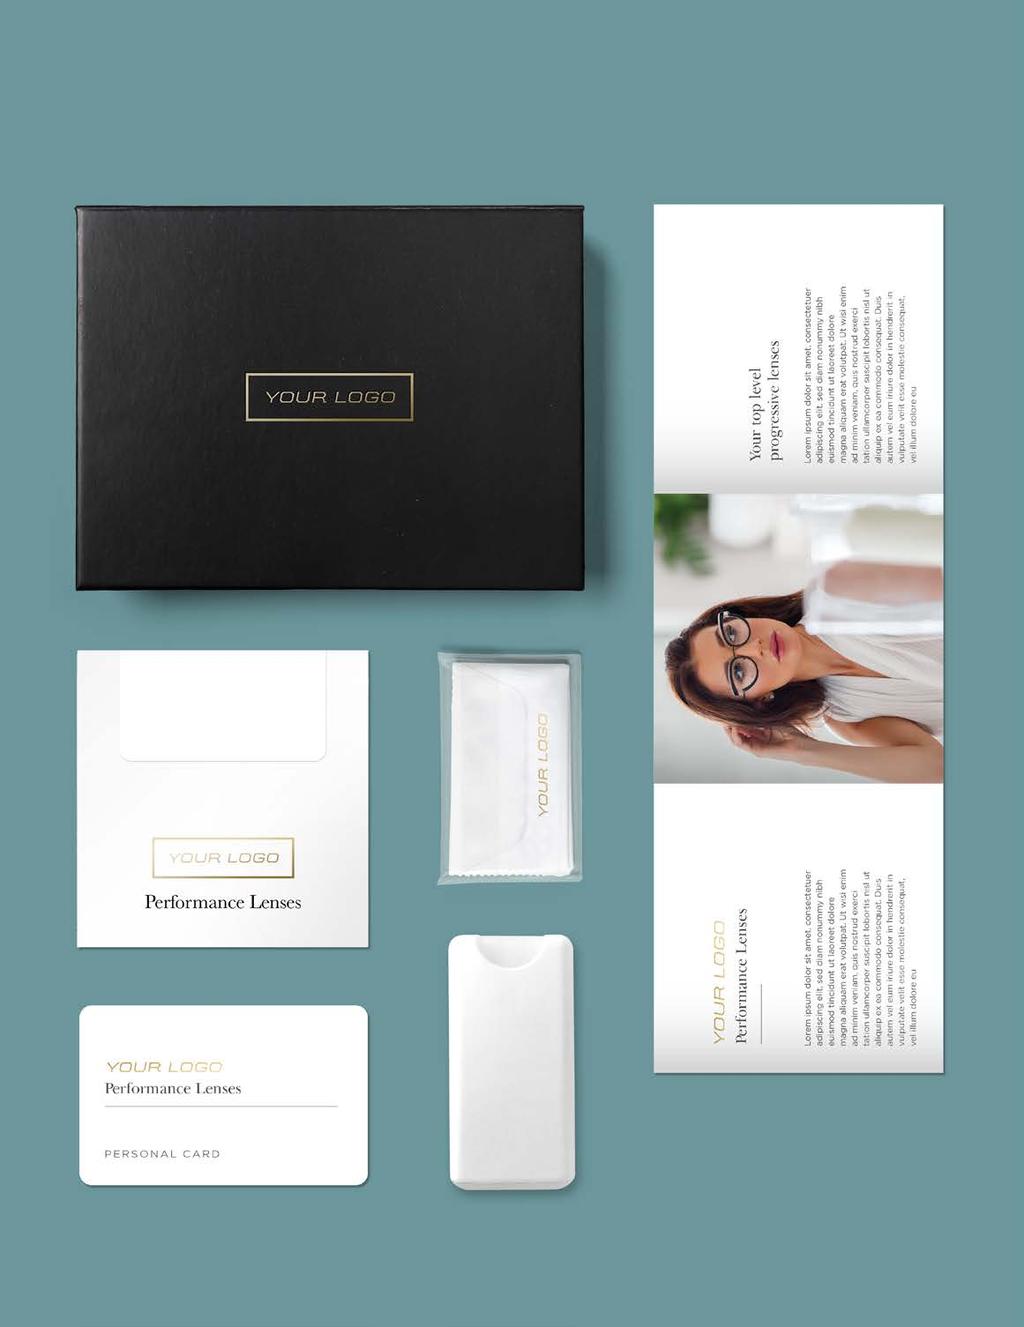 Kits Kit composition Customized box Coordinated envelope Coordinated card Customized cleaning cloth Presentation leaflet Customized cleaning spray Composizione